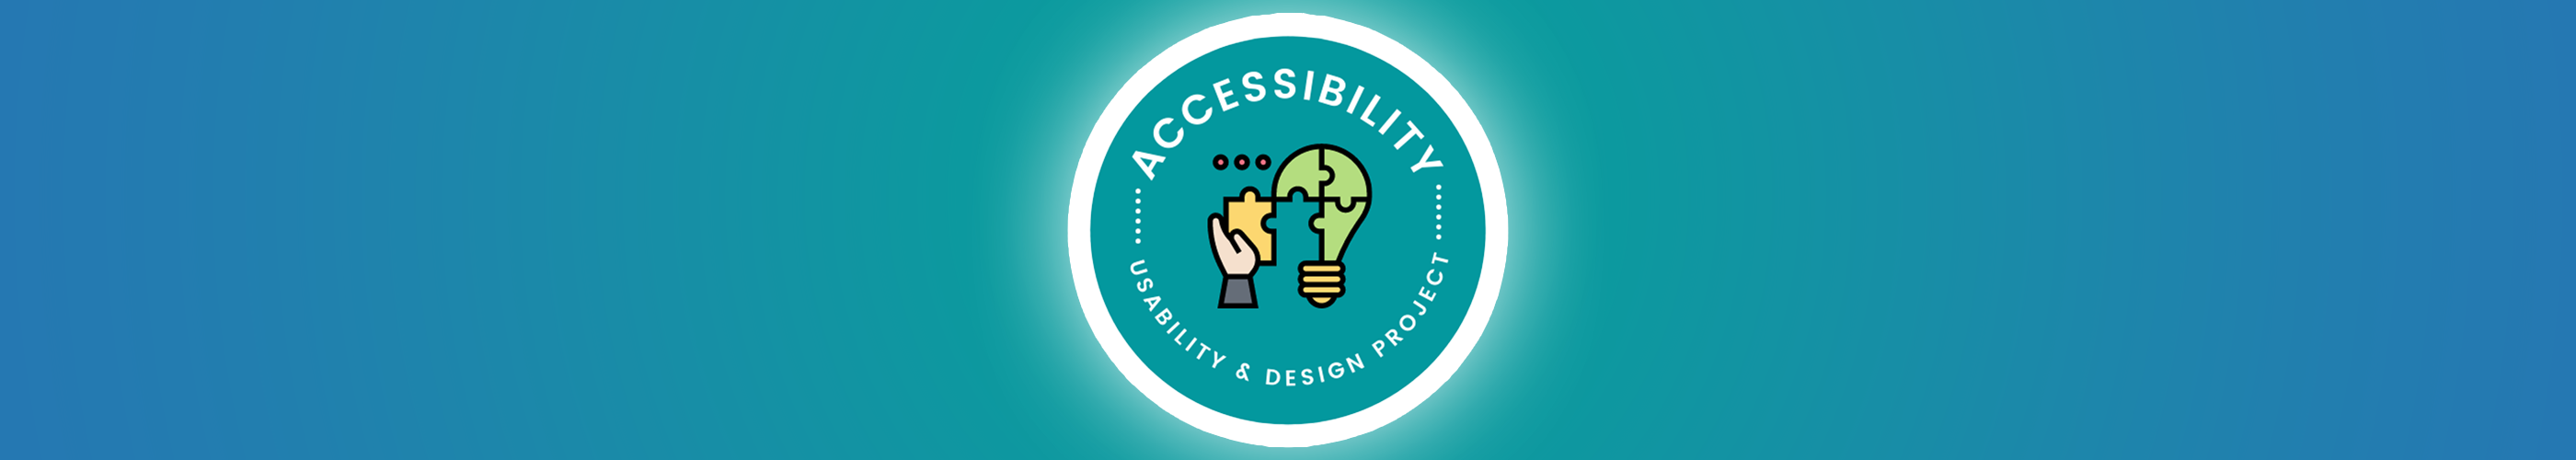 Accessibility: Usability & Design Project